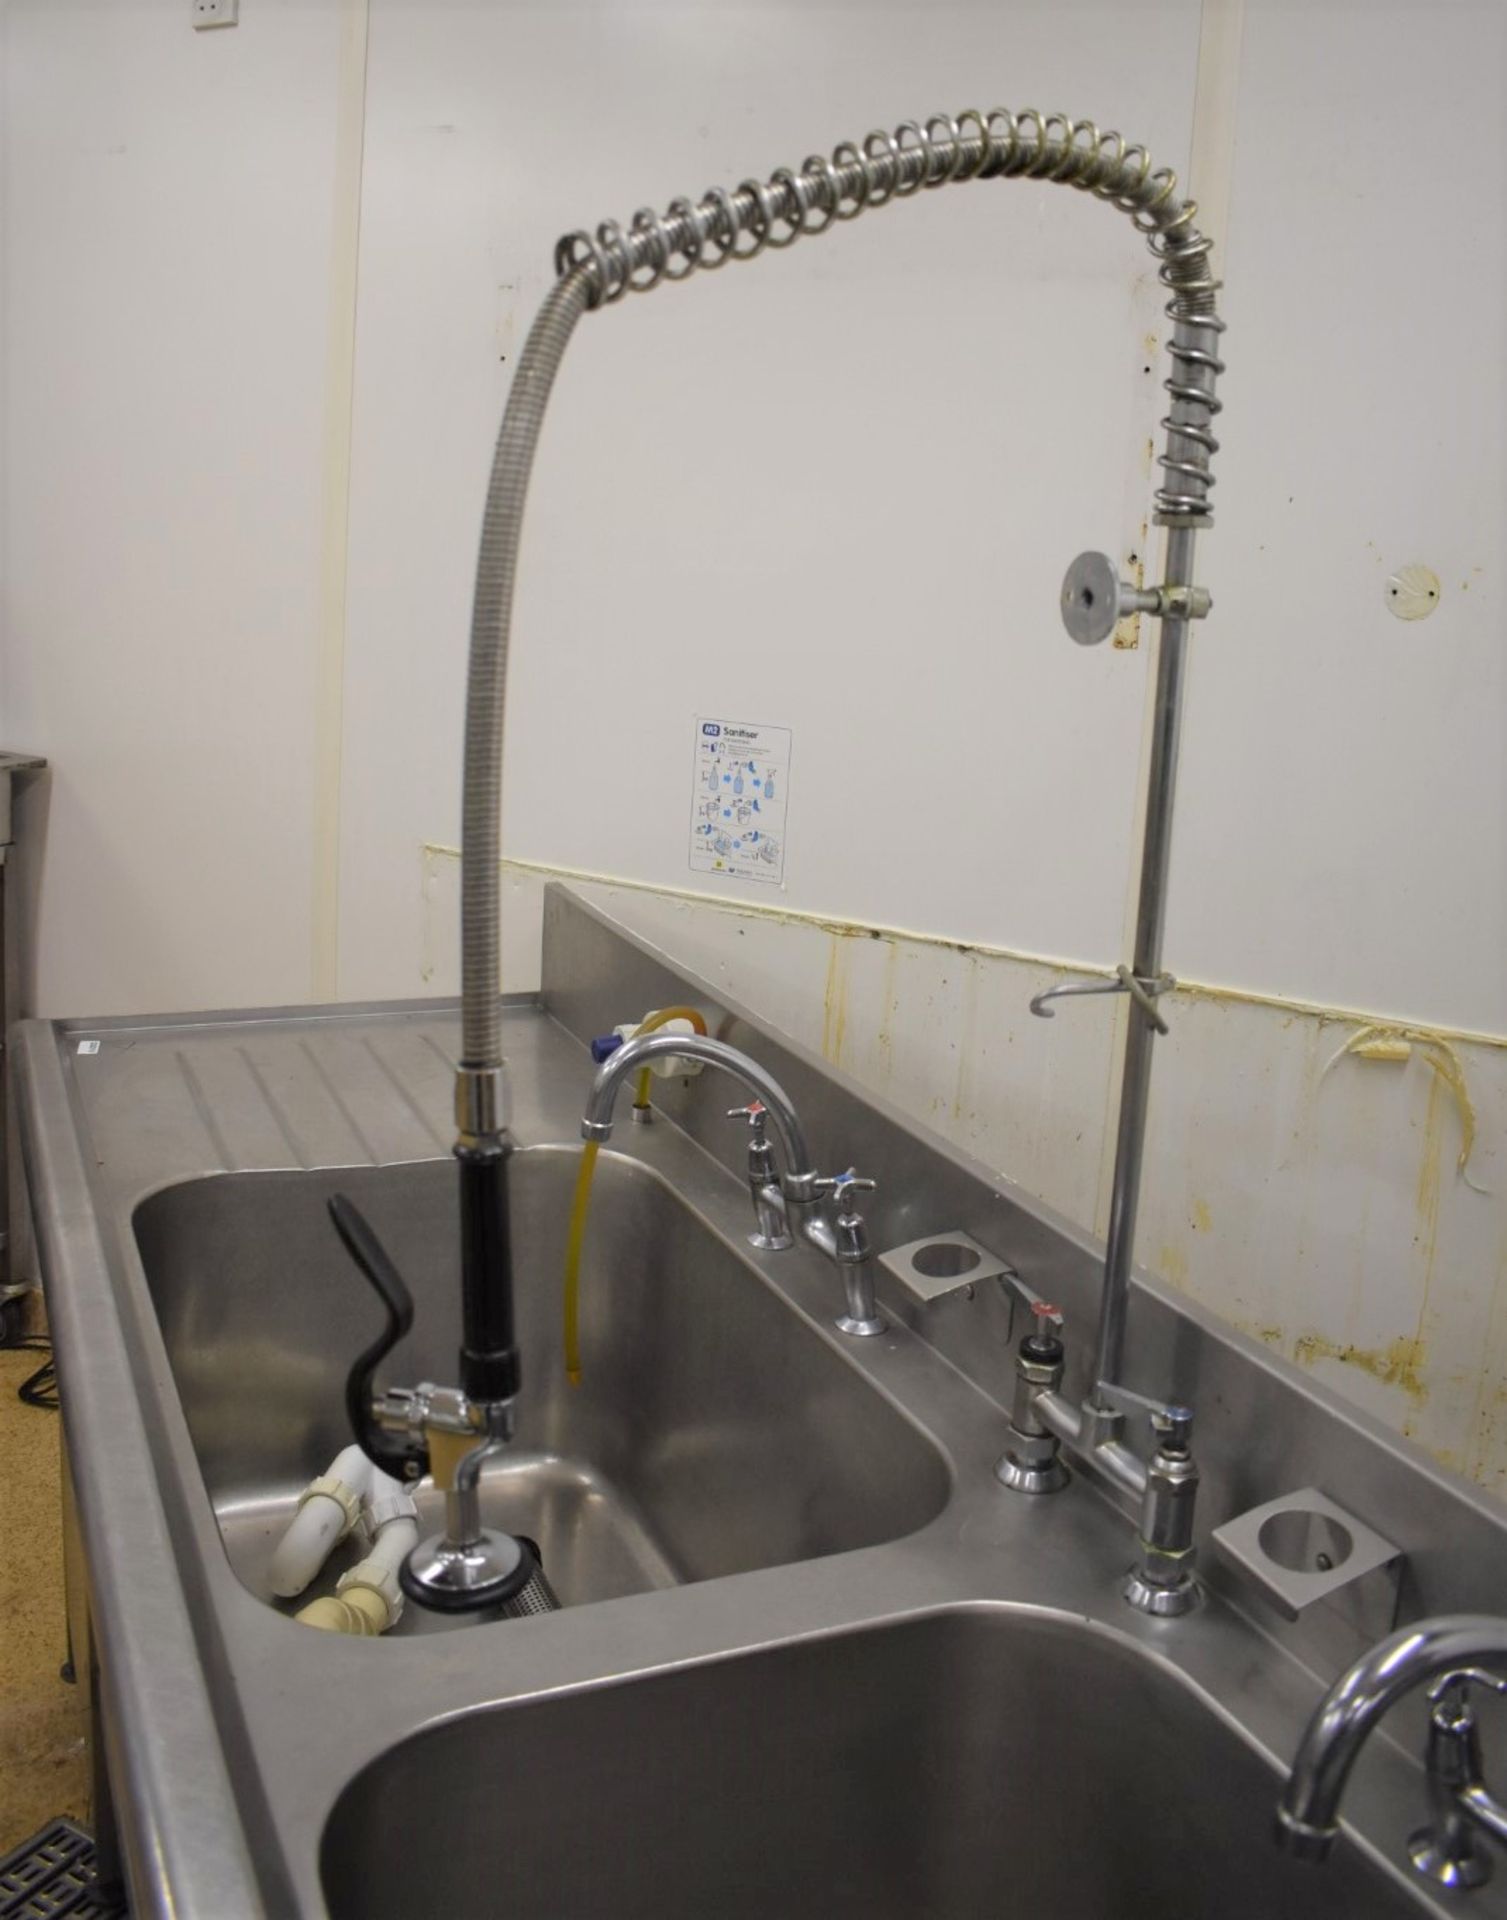 1 x Large Stainless Steel Wash Unit With Twin Deep Sink Basins, Hose Rinser Tap, Mixer Taps, - Image 10 of 10